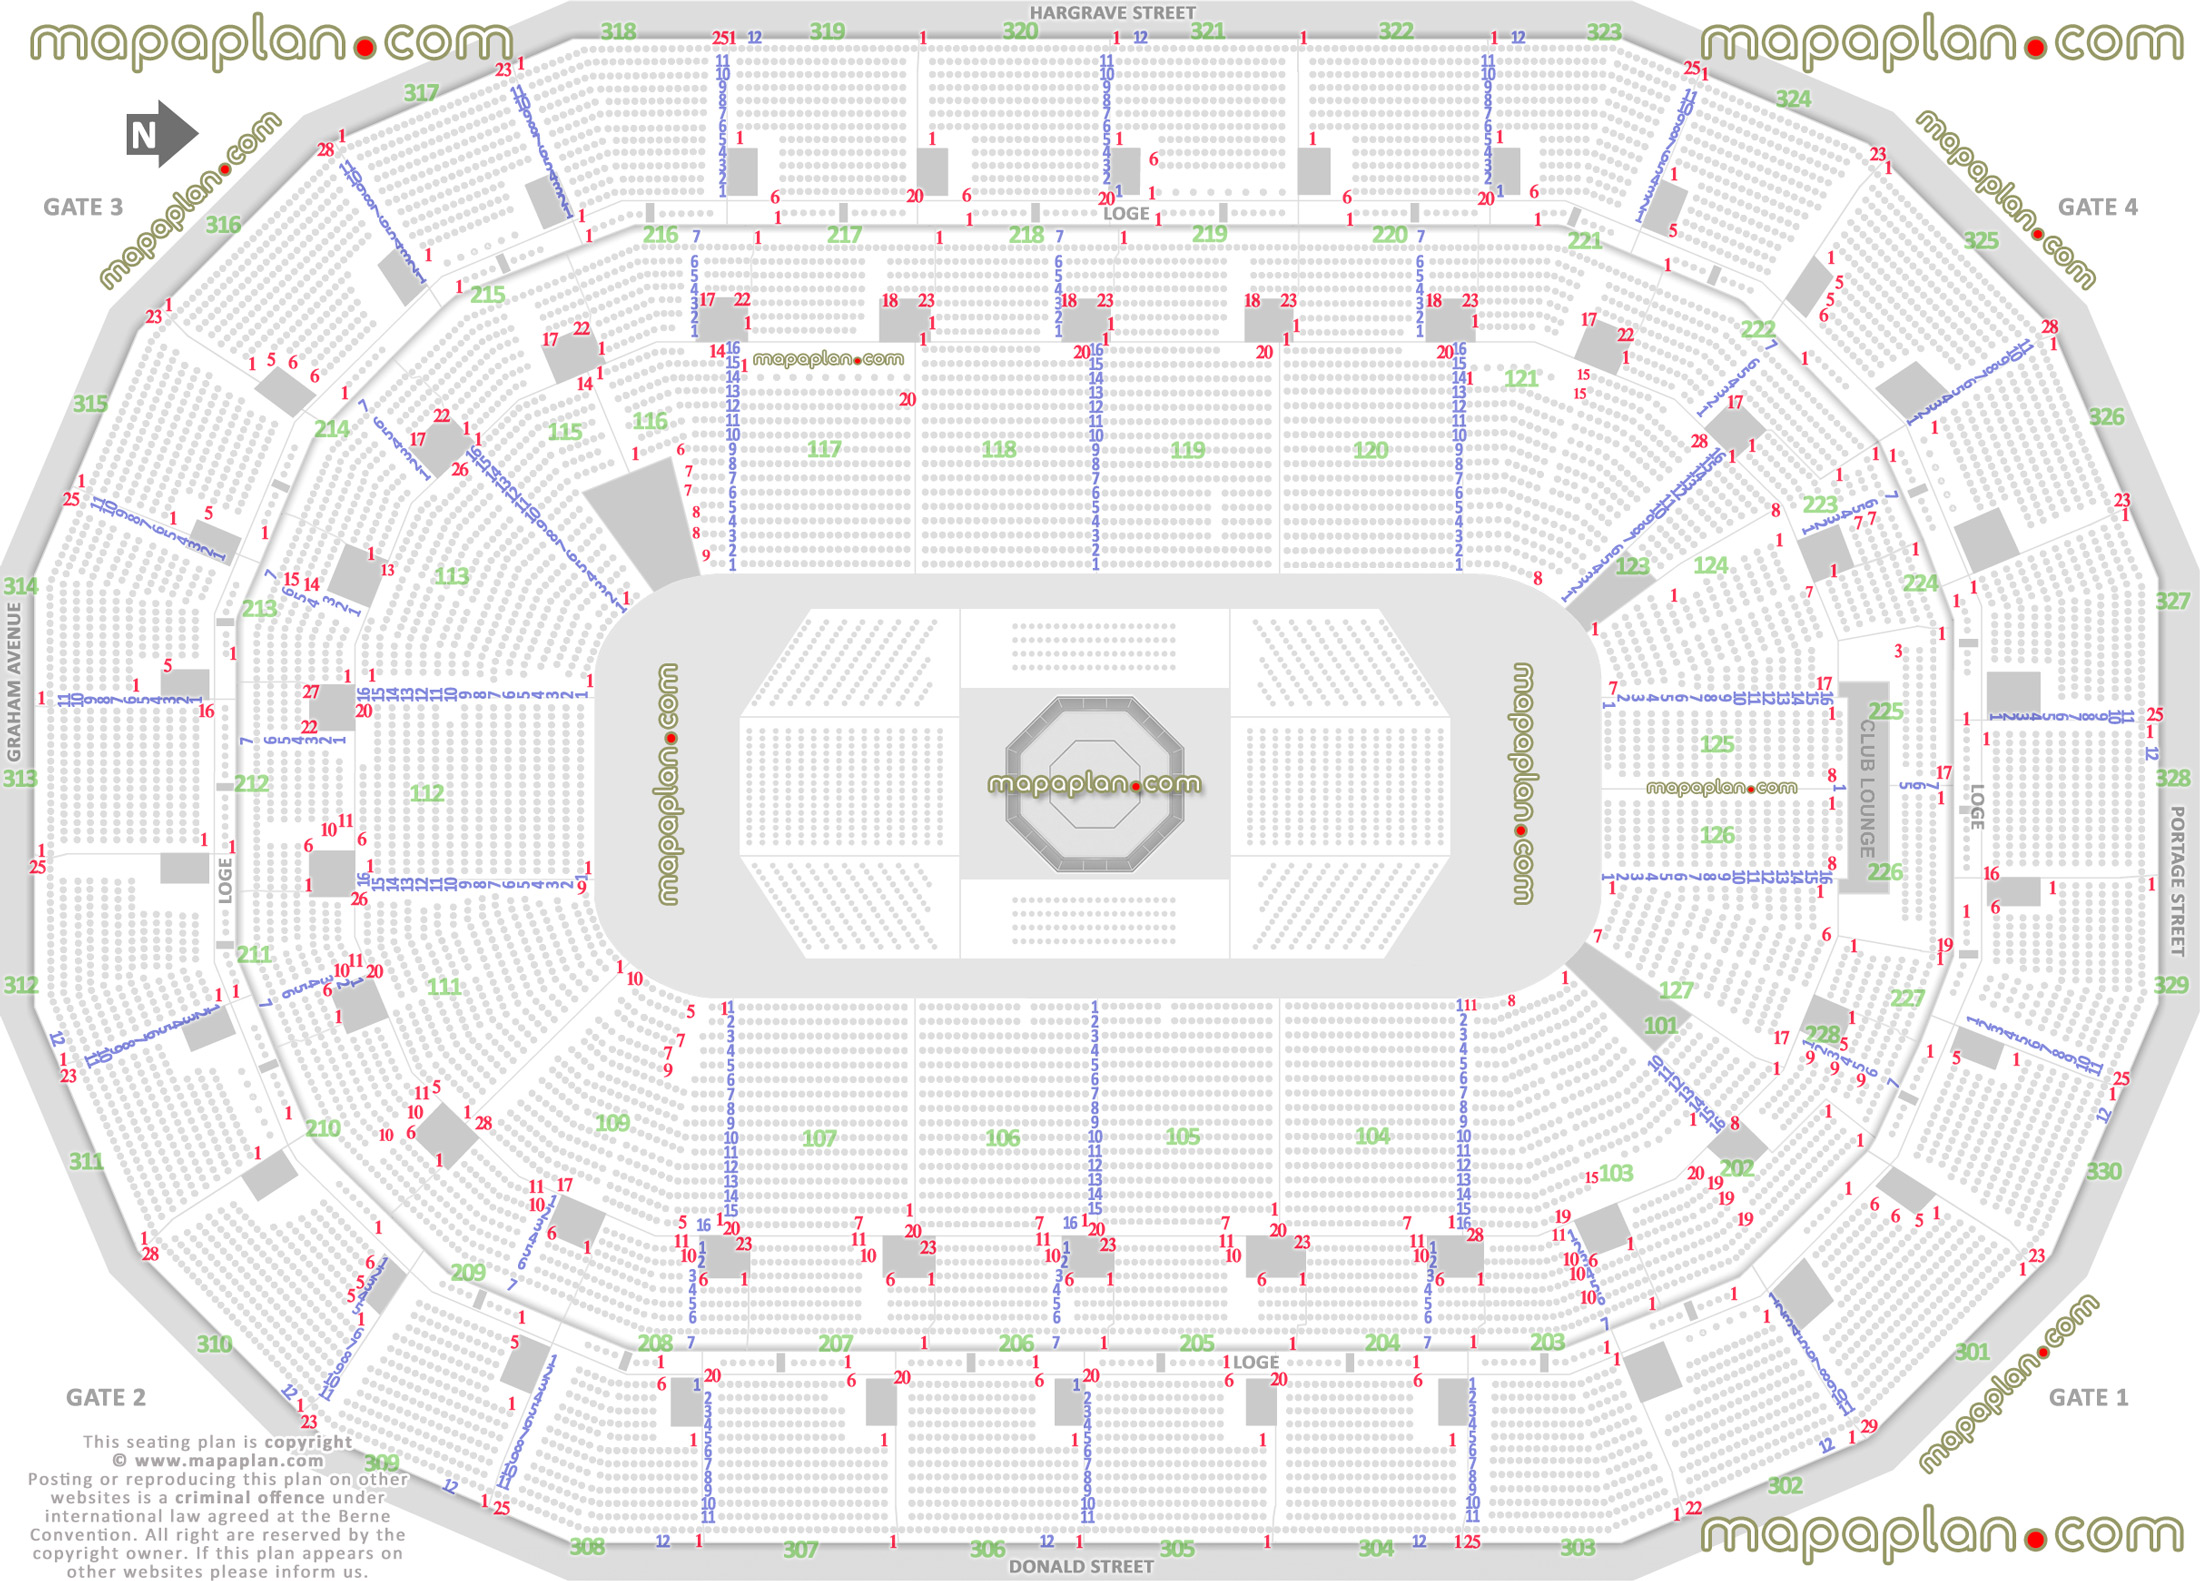 ufc mma fights winnipeg manitoba canada detailed seating capacity arrangement arena row numbers layout arena main entrance gate exits map west east south north detailed fully seated chart setup standing room only sro area wheelchair disabled handicap accessible seats plan Winnipeg Canada Life Centre seating chart